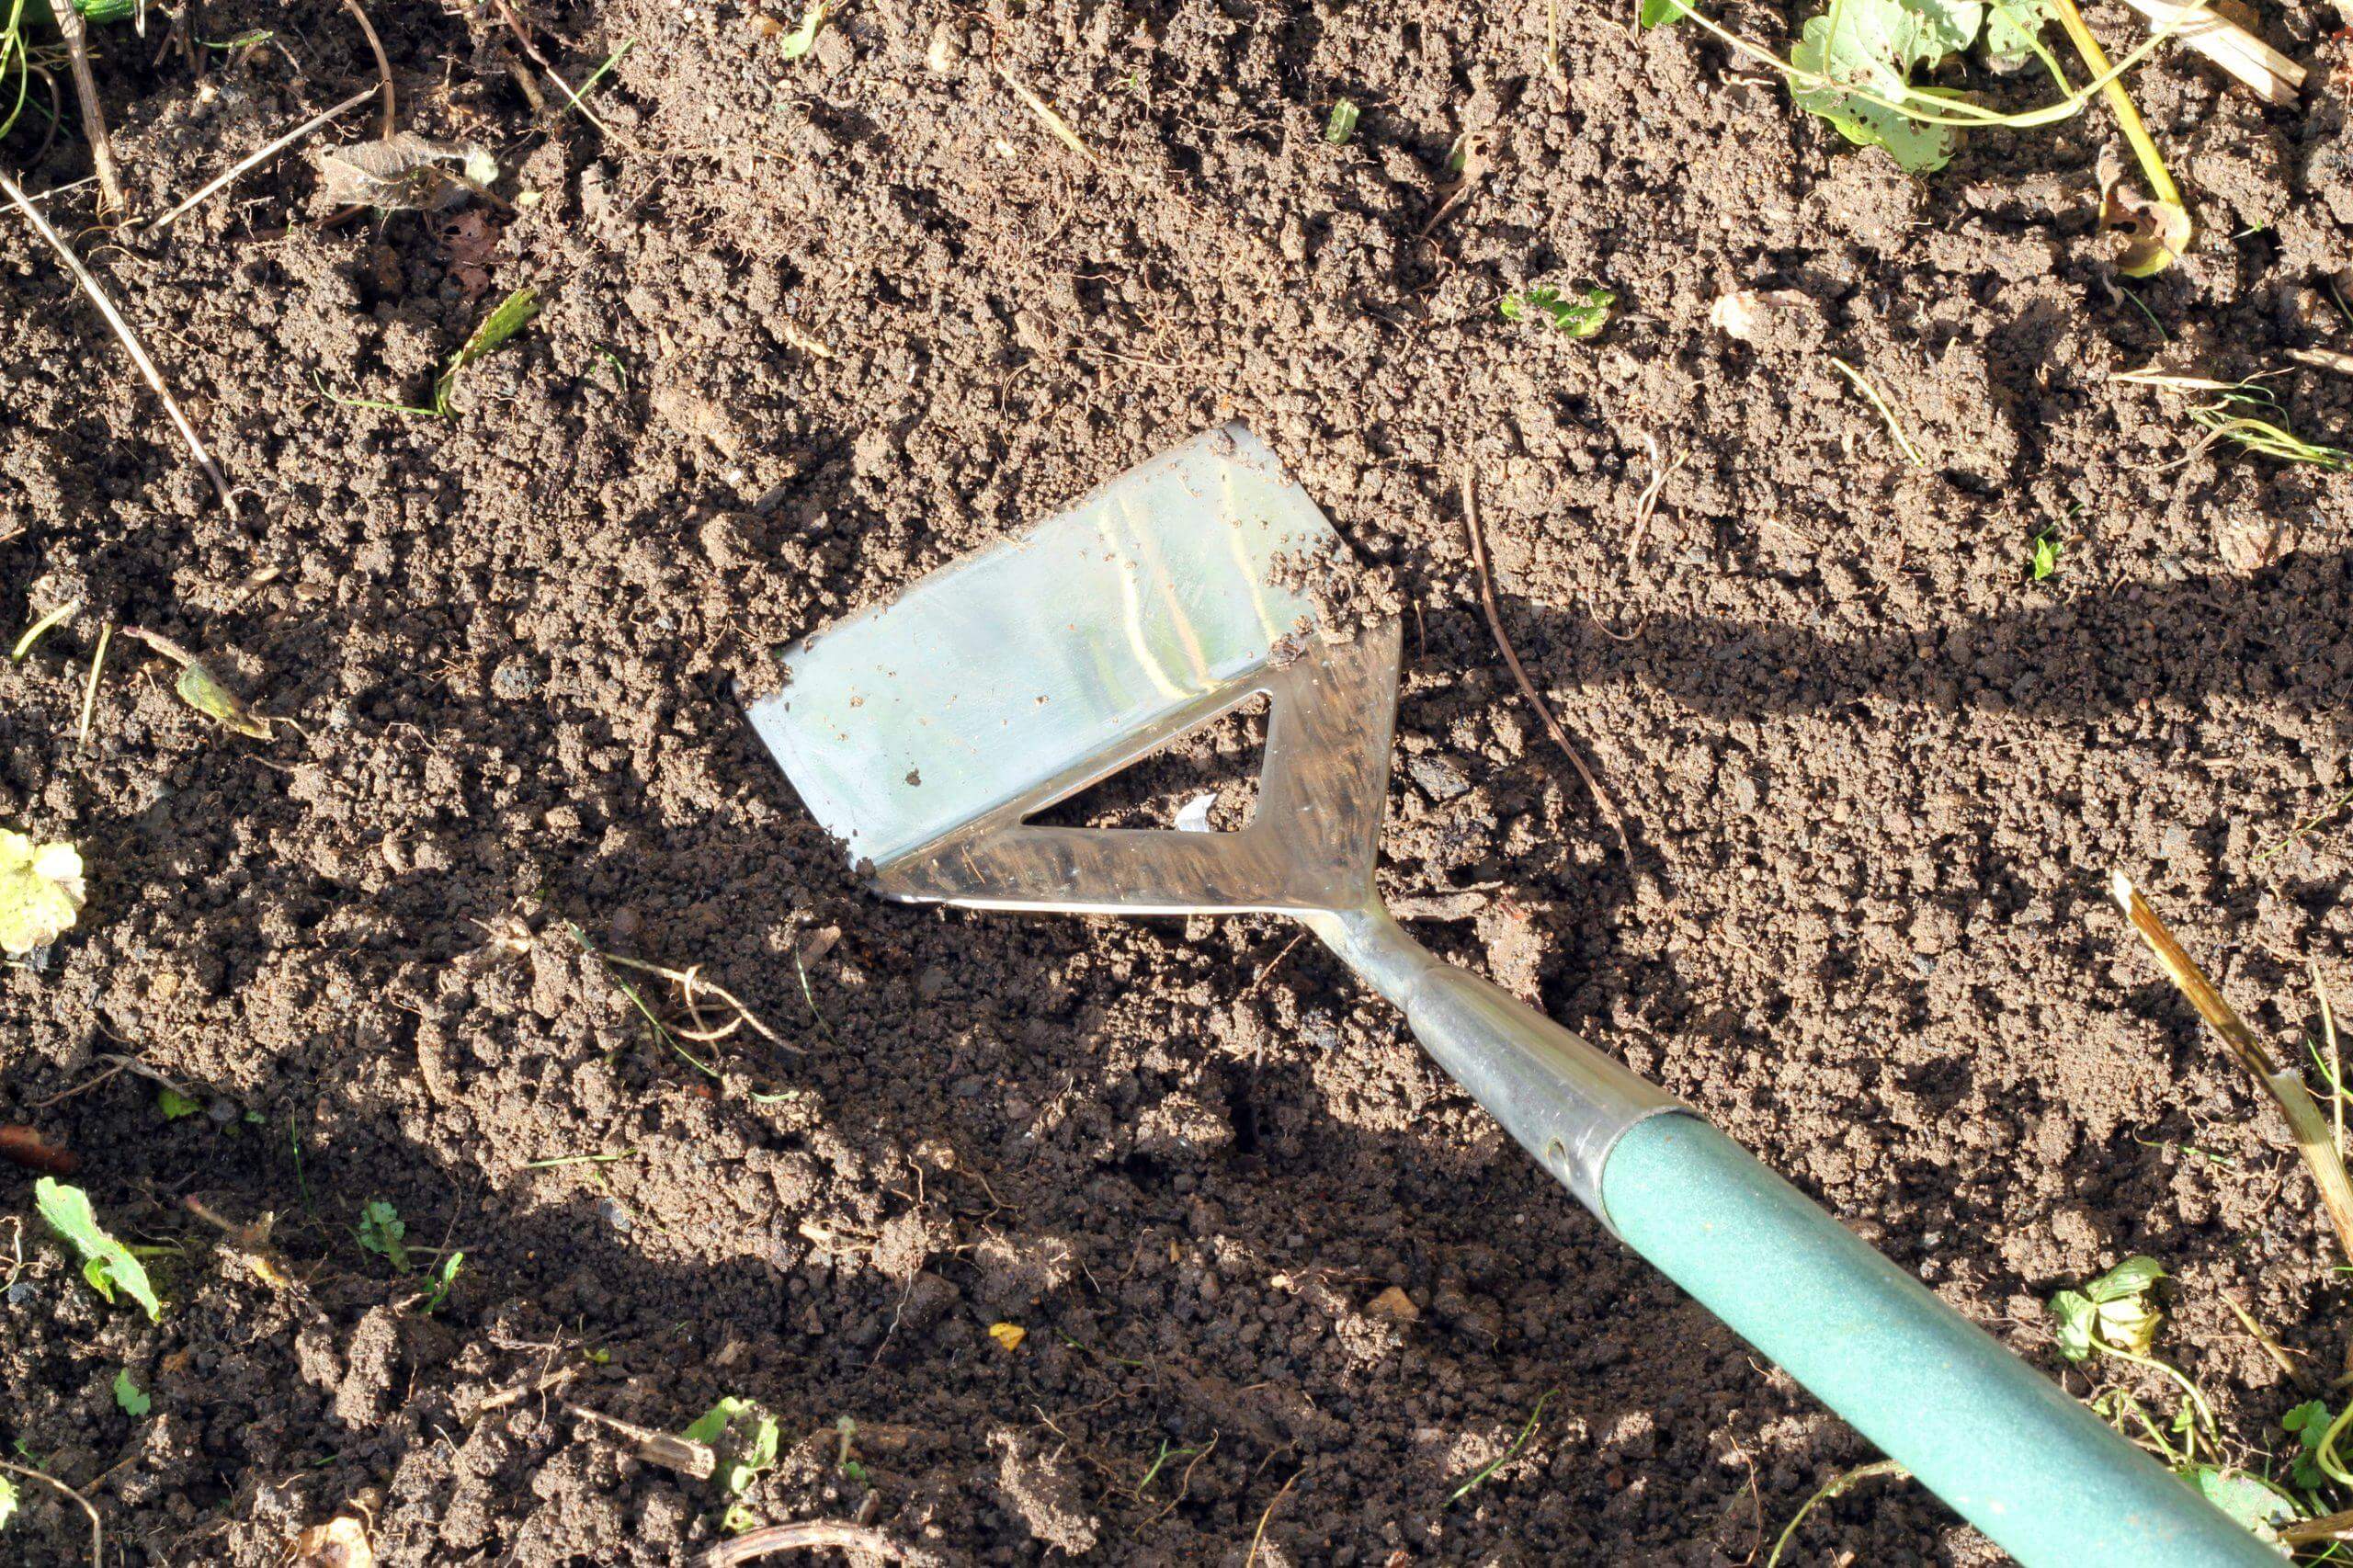 Use of how to manually remove weeds without damaging your plants or crops